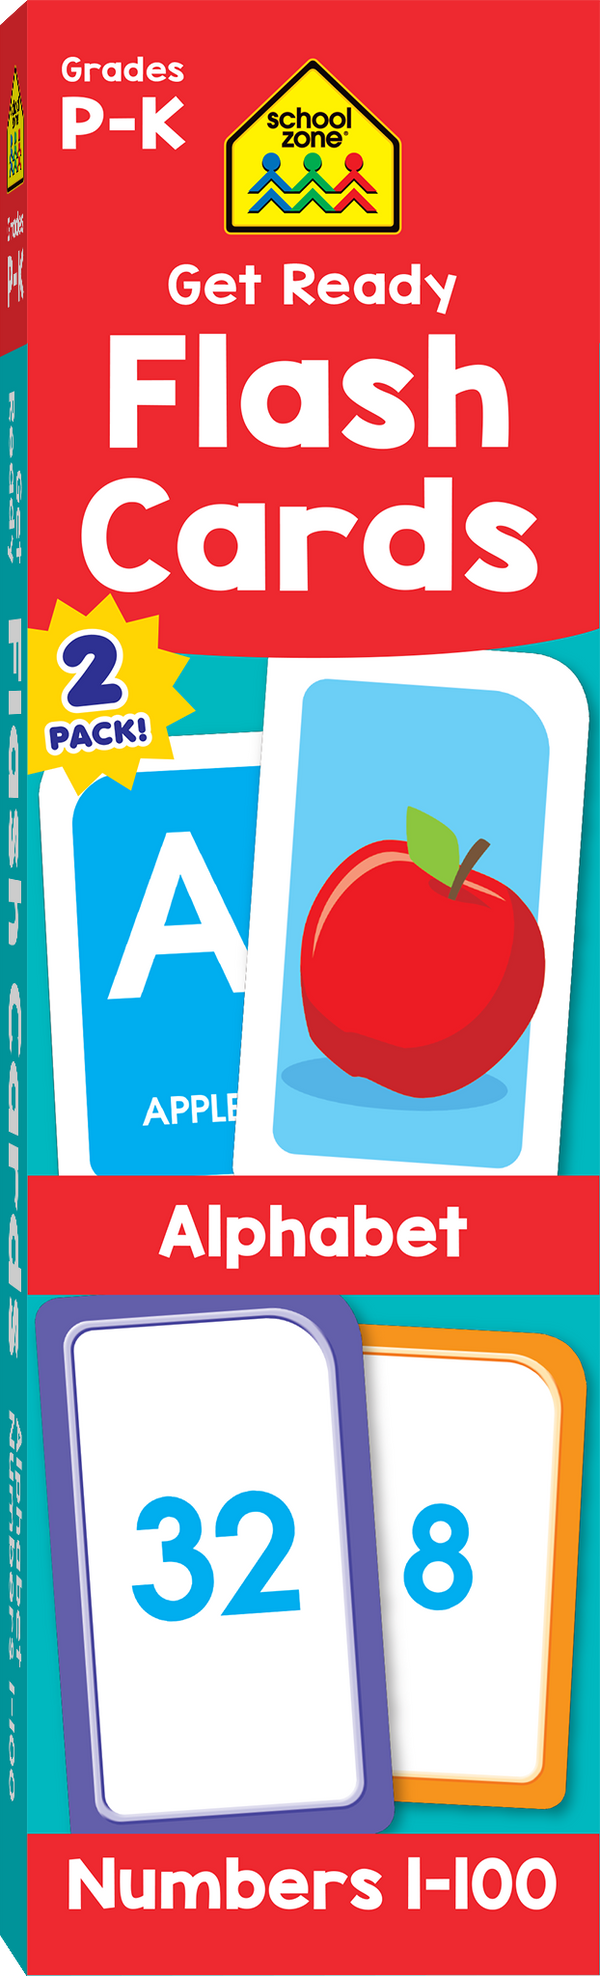 This Get Ready Flash Cards Alphabet & Numbers 2-Pack Grades P-K  will help build letter and number skills!